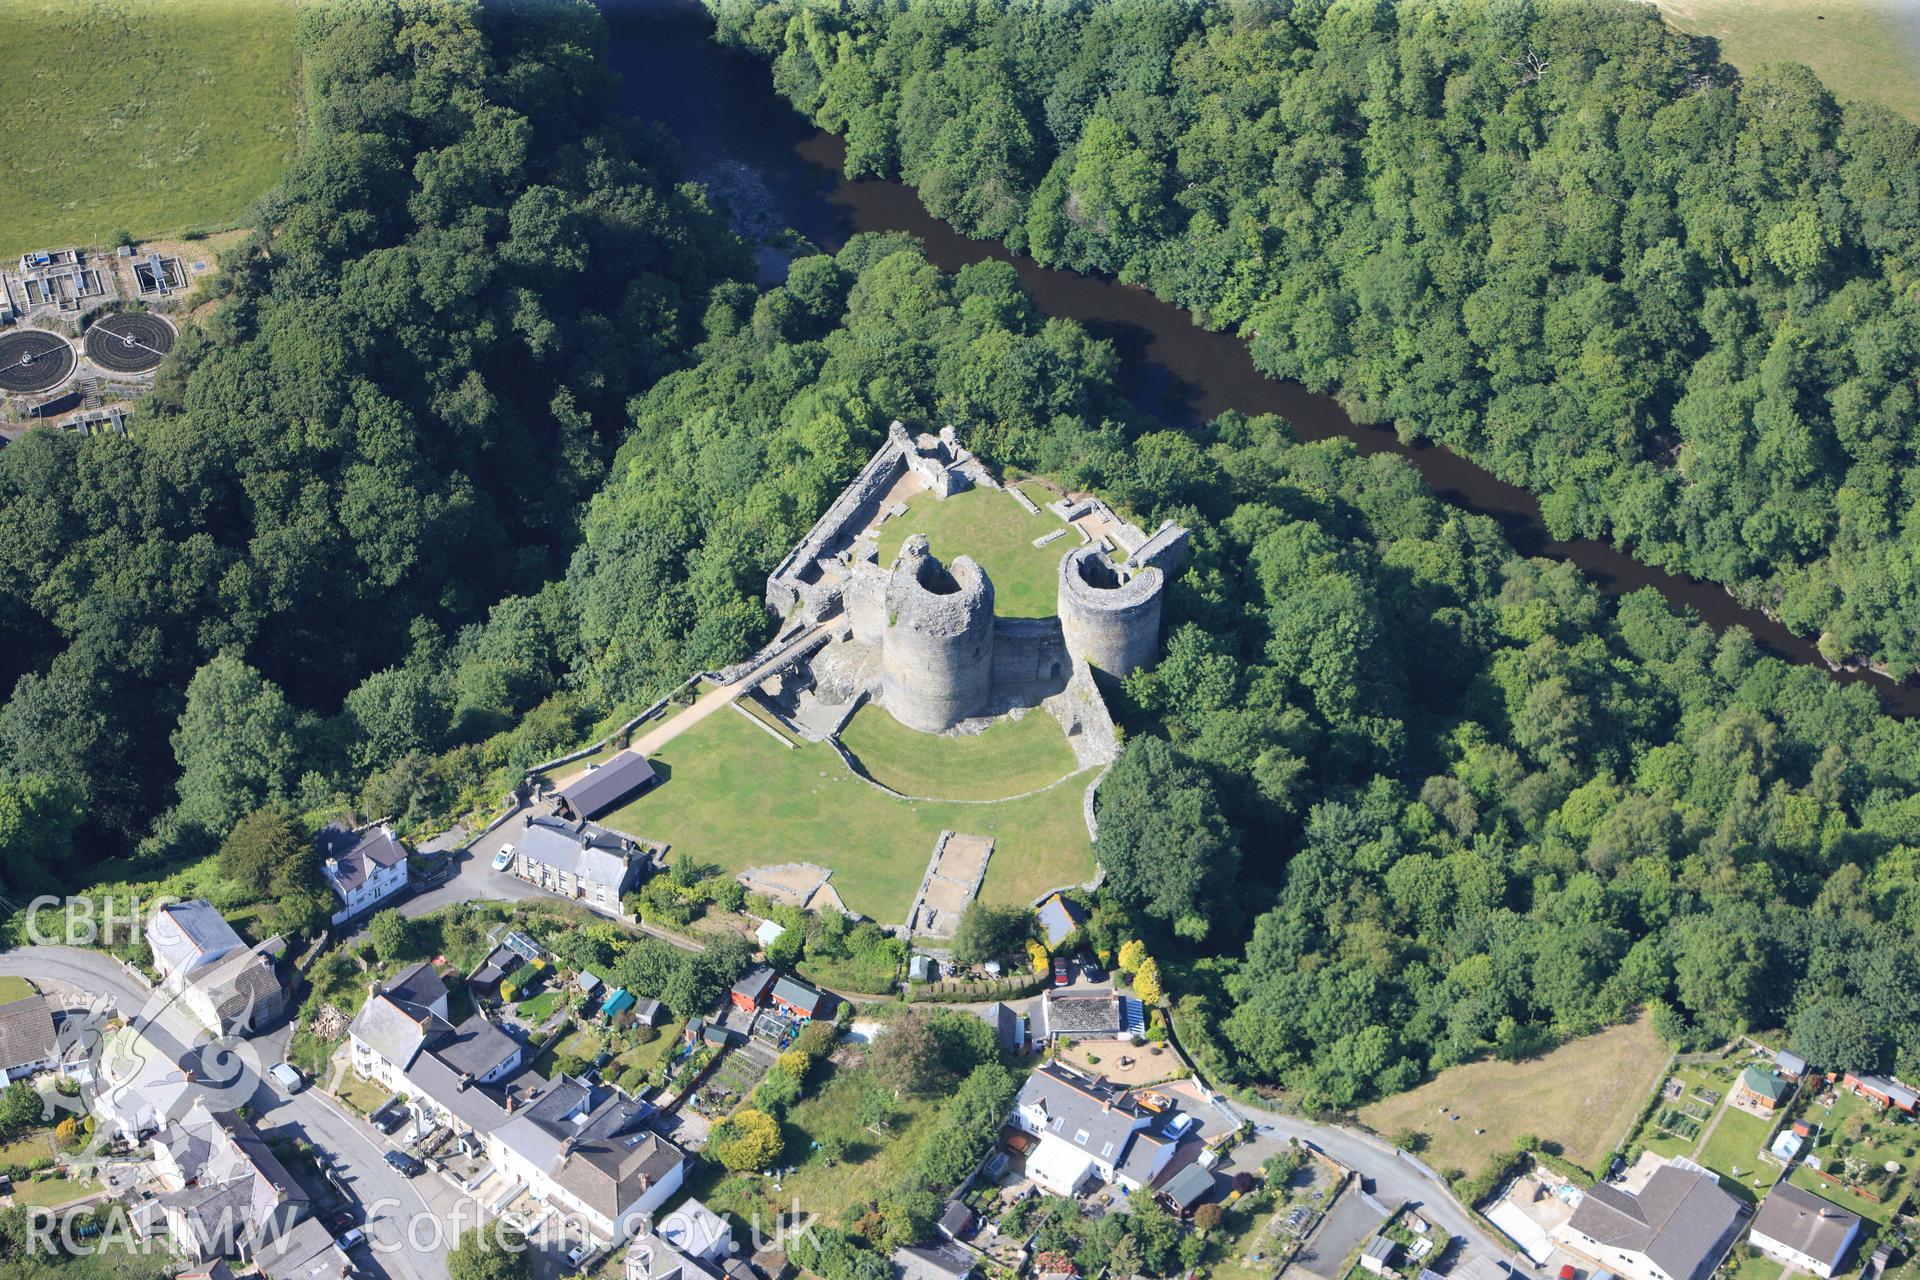 RCAHMW colour oblique photograph of Cilgerran castle. Taken by Toby Driver and Oliver Davies on 28/06/2011.